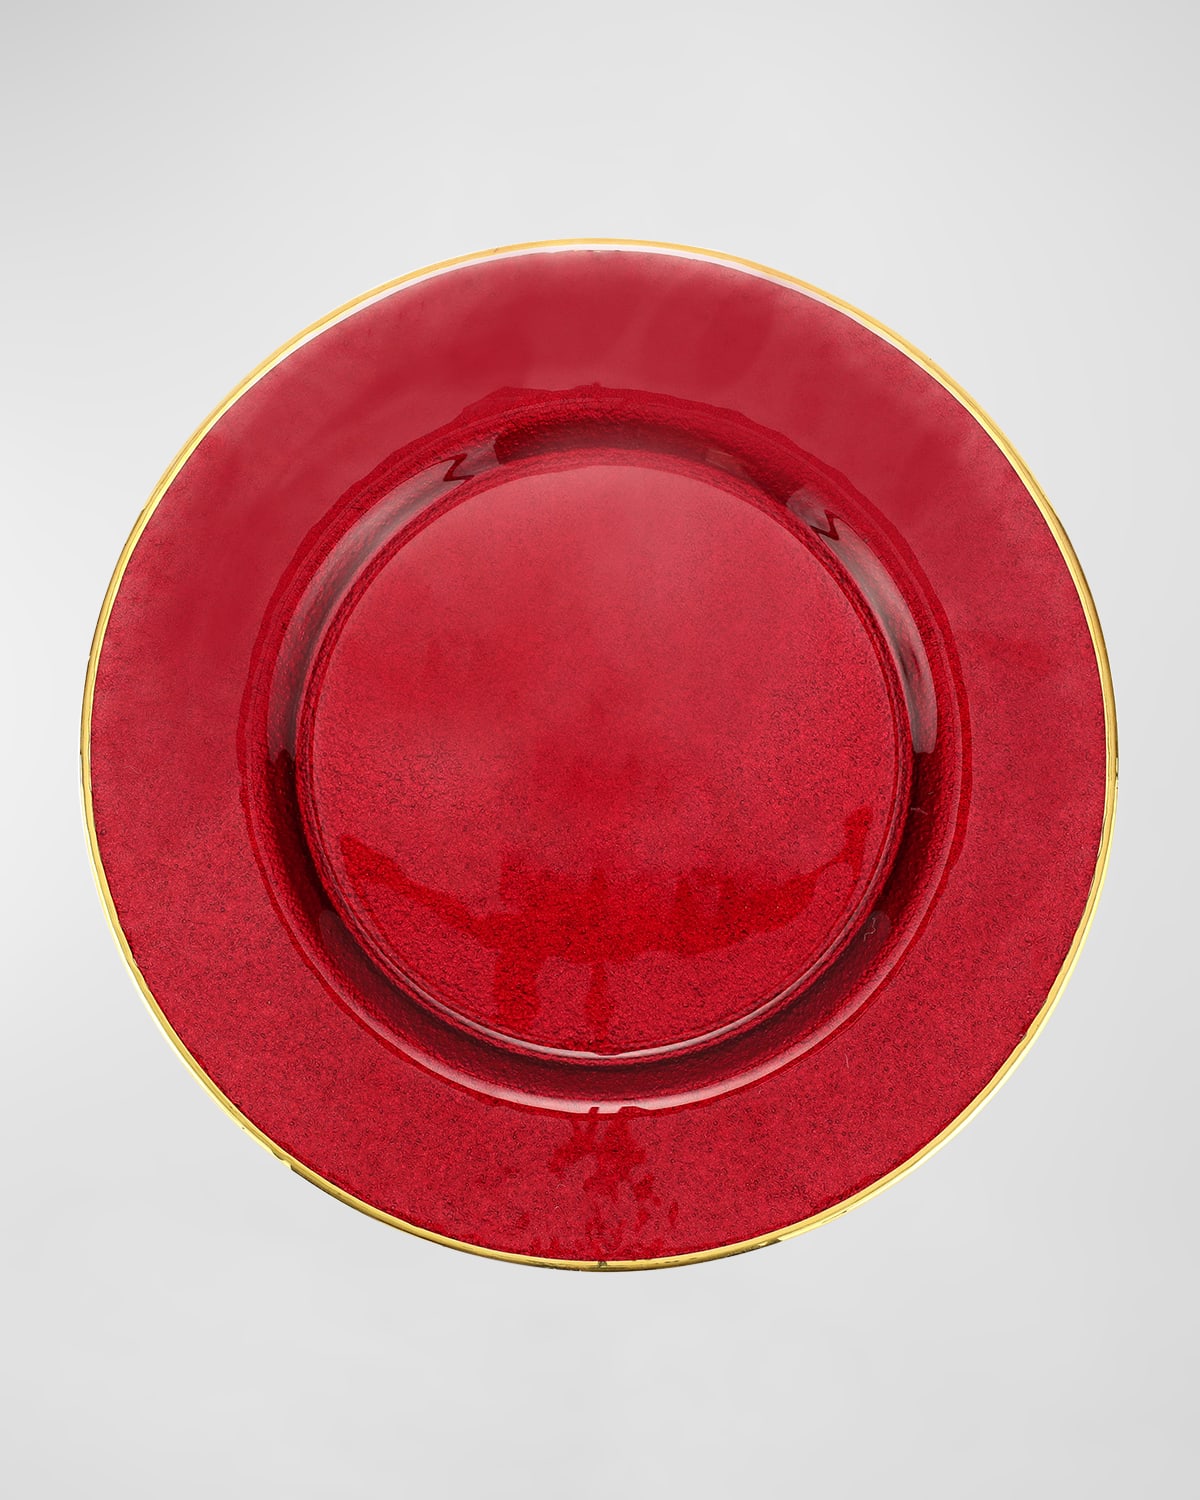 Vietri Metallic Glass Ruby Charger Plate In Red